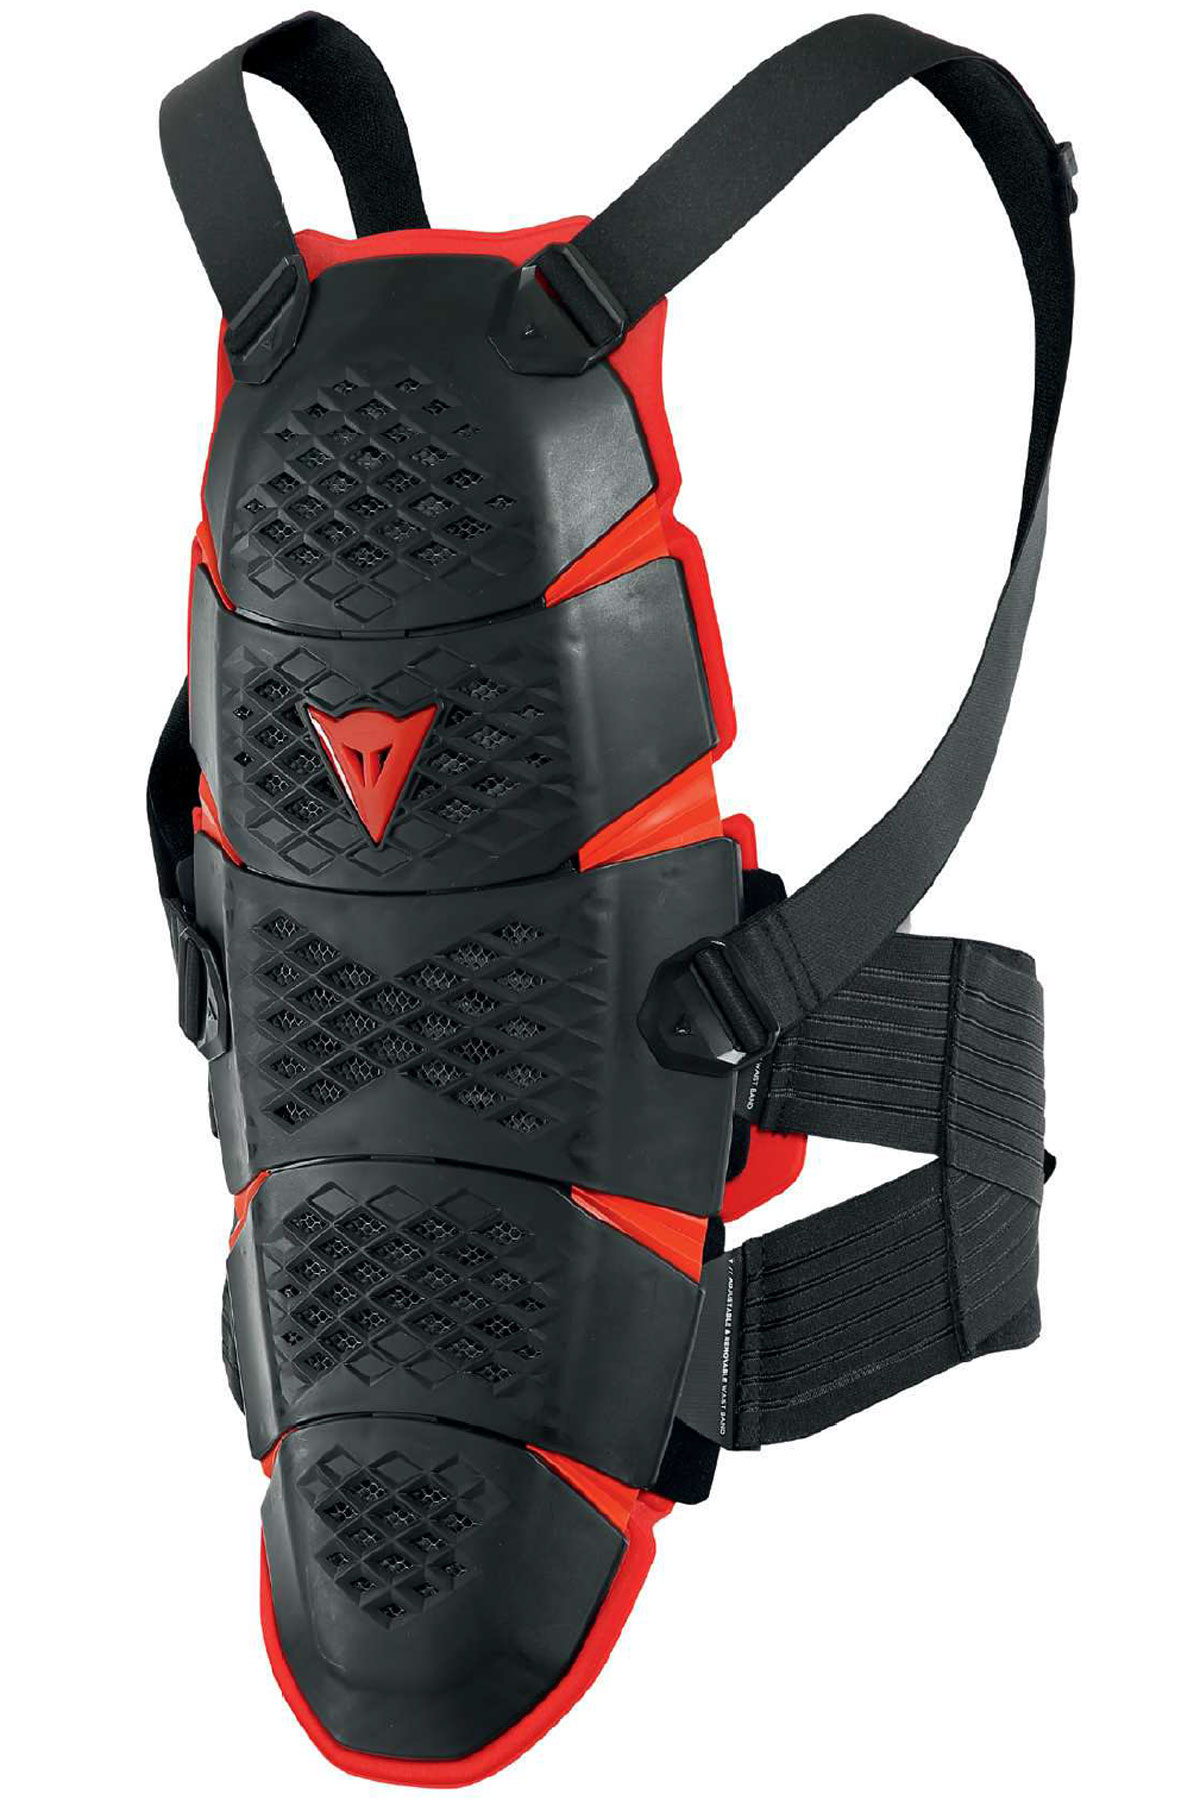 Magasin Dainese Grenoble : Protection dorsale dainese PRO-ARMOR